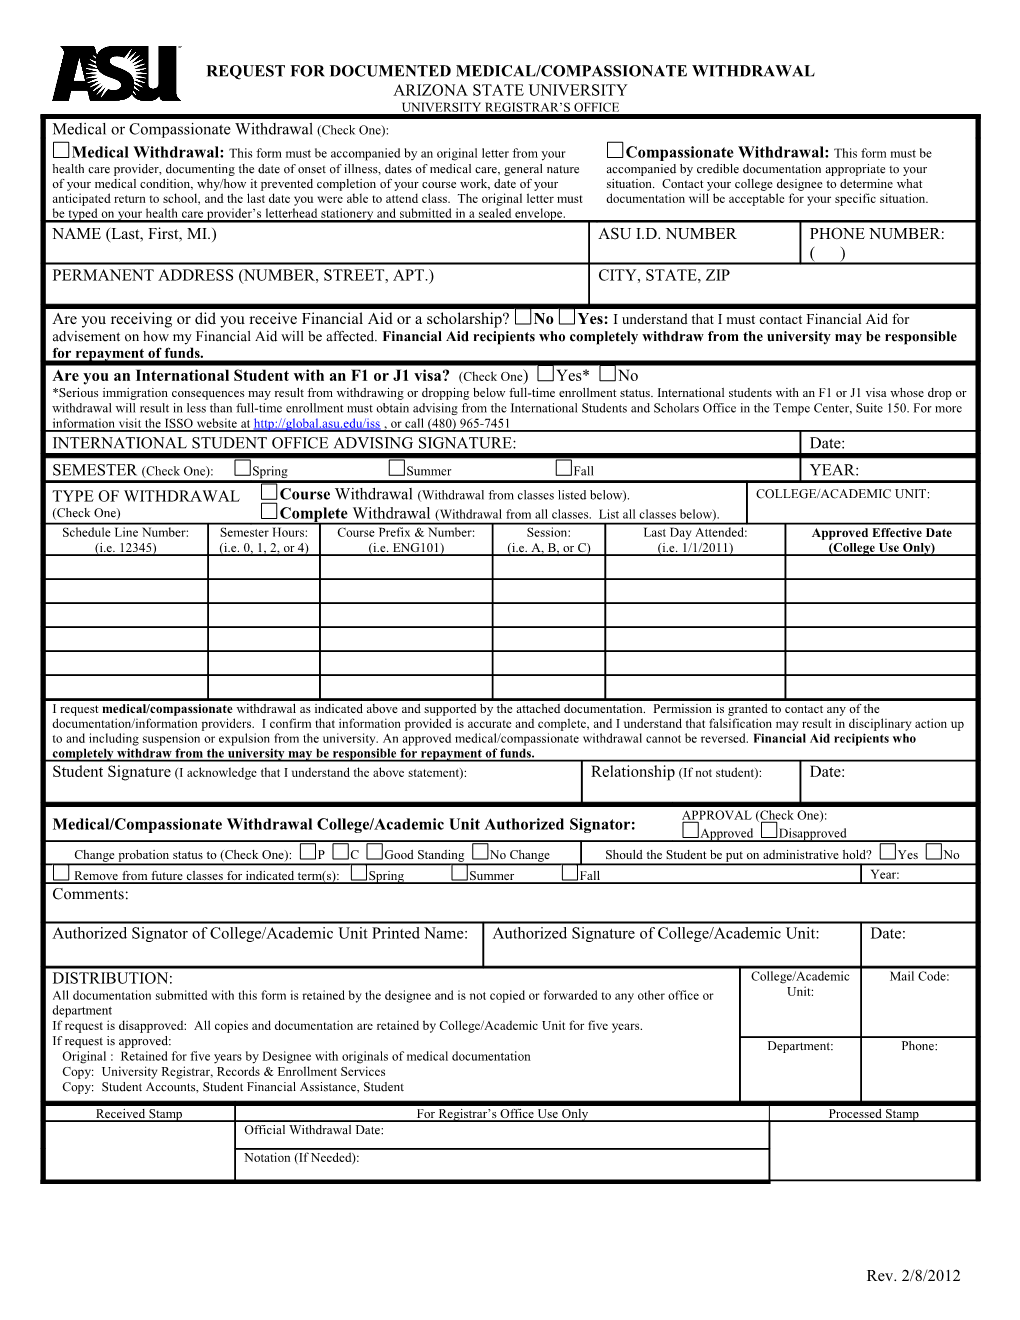 Request for Documented Medical Withdrawal